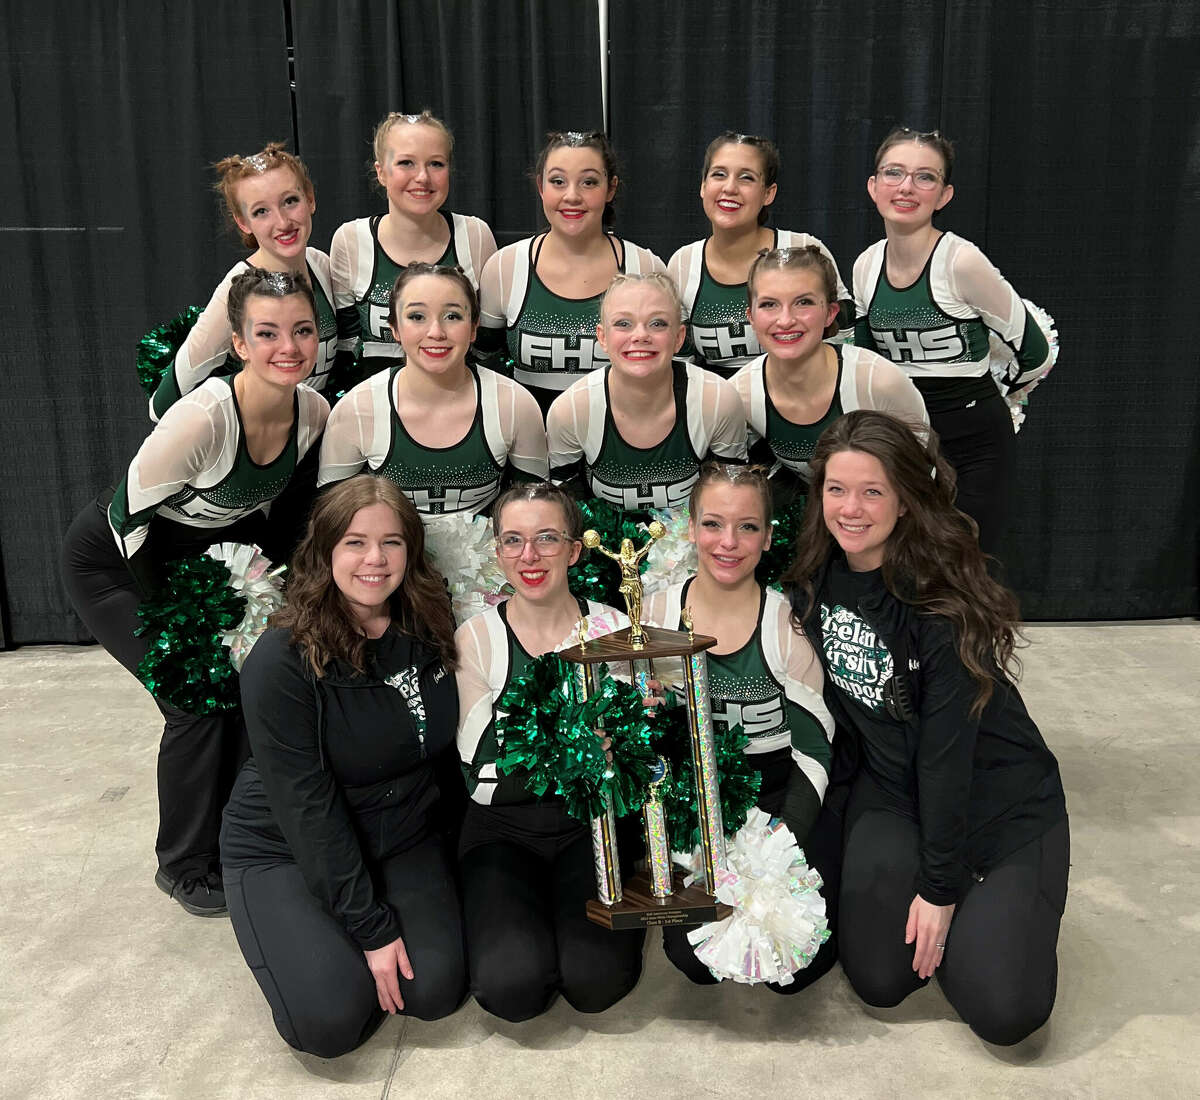 Members of Freeland's state champion pompon team are (front, from left) coach Brittany Newbold, Anna Armstrong, Makayla Cook, coach Kailyn Humphrey; (middle, from left) Lydia Stachowiak, Ava Wolinski, Hannah Abbe, Ava Reed; and (back, from left) Madison McLaughlin, Macie Trainor, Kenzie Schultz, Sasha Seegobin, and Michaela Lewis.